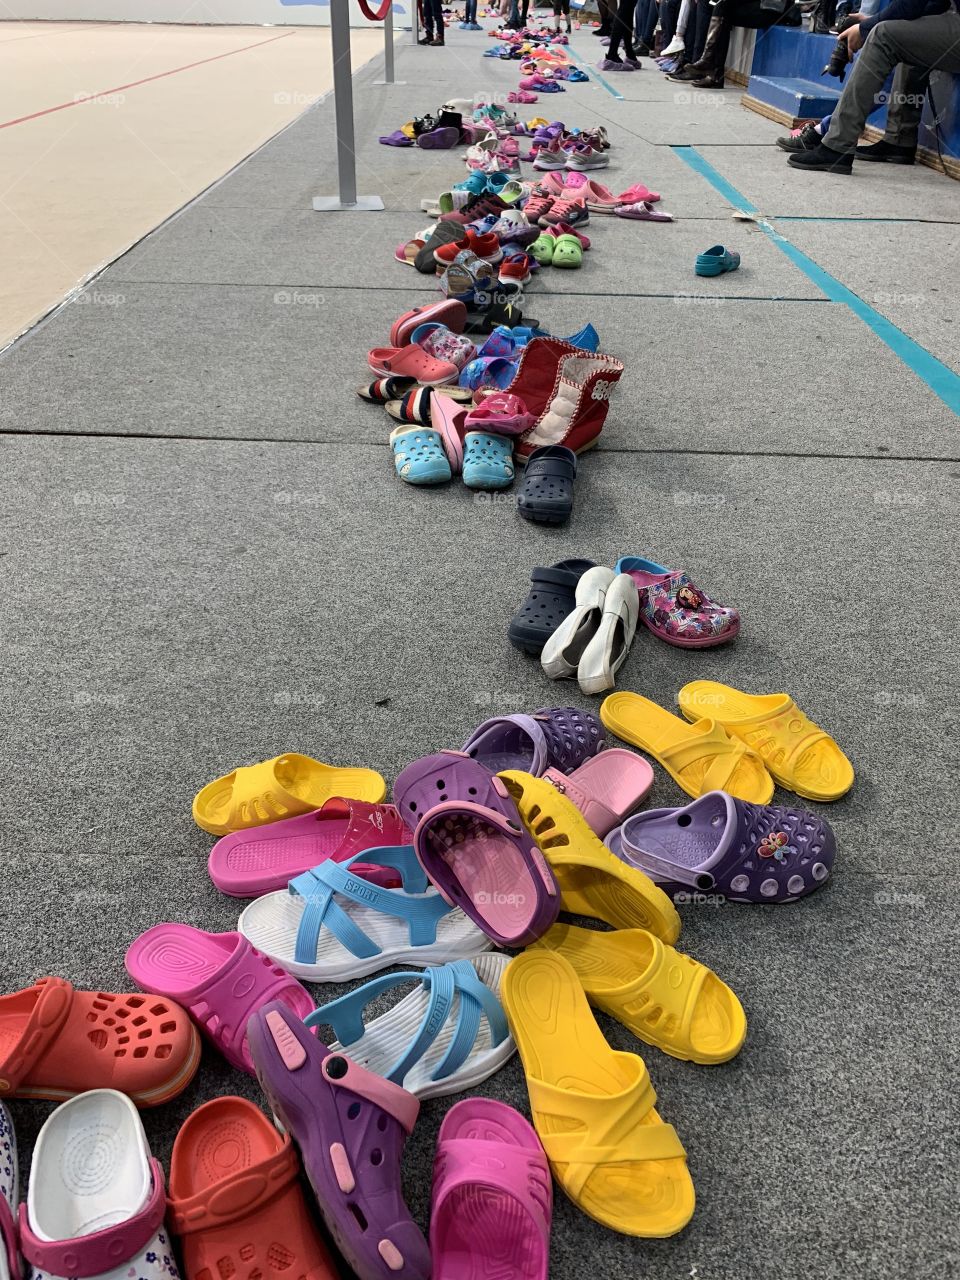 Little gymnasts took off their shoes before the start of the competition. A lot of shoes...